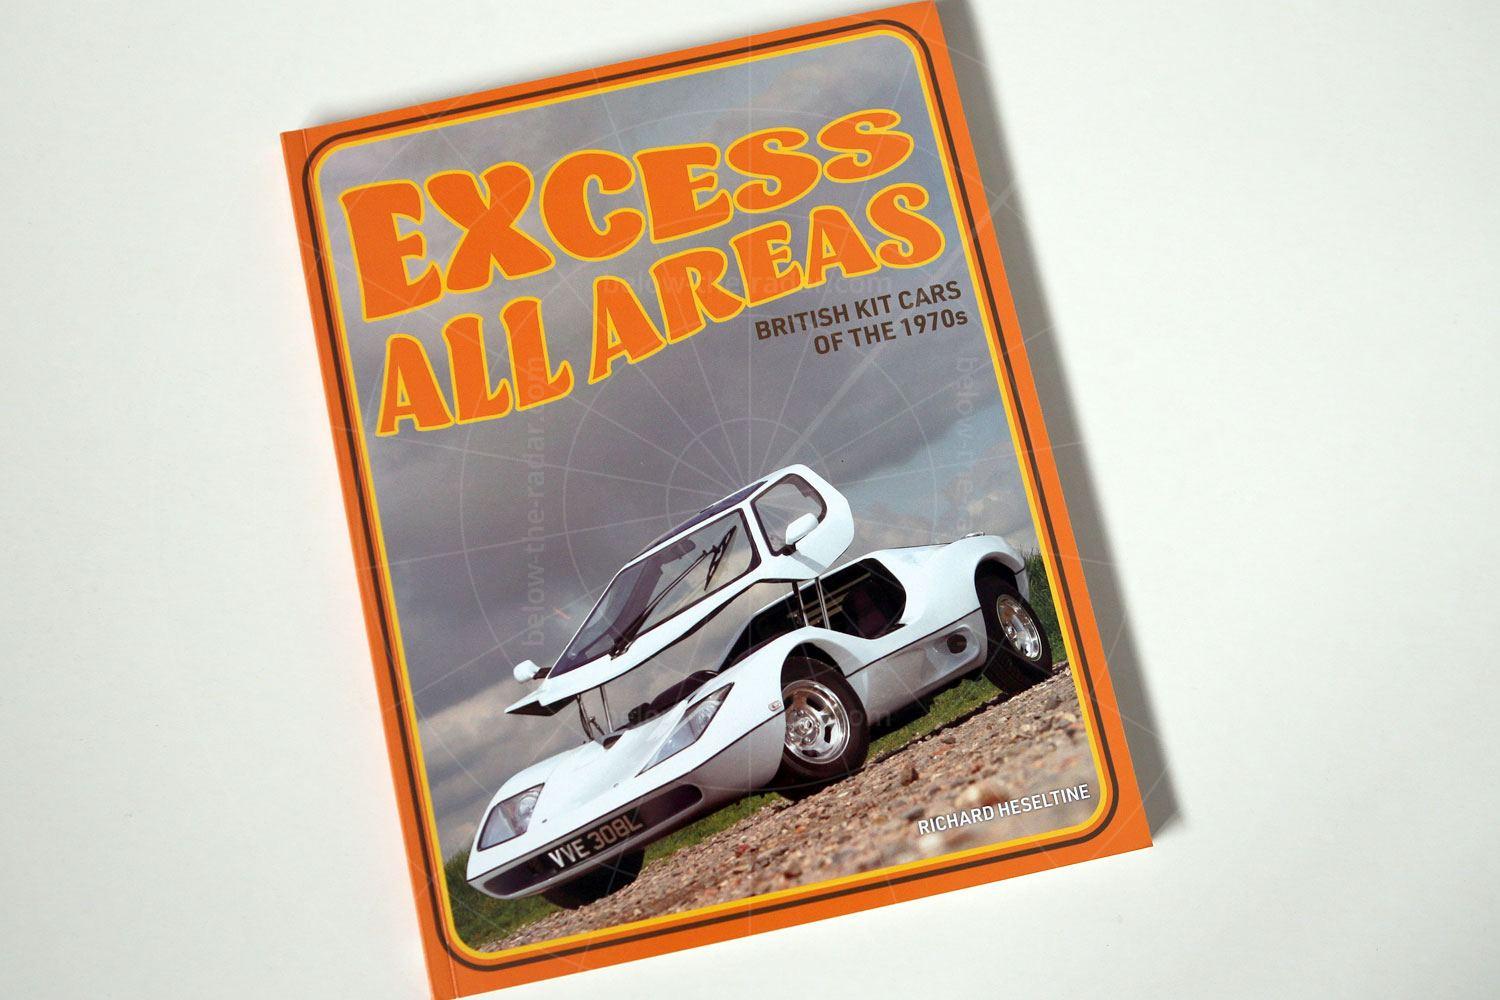 Excess All Areas book Pic: Richard Heseltine | 